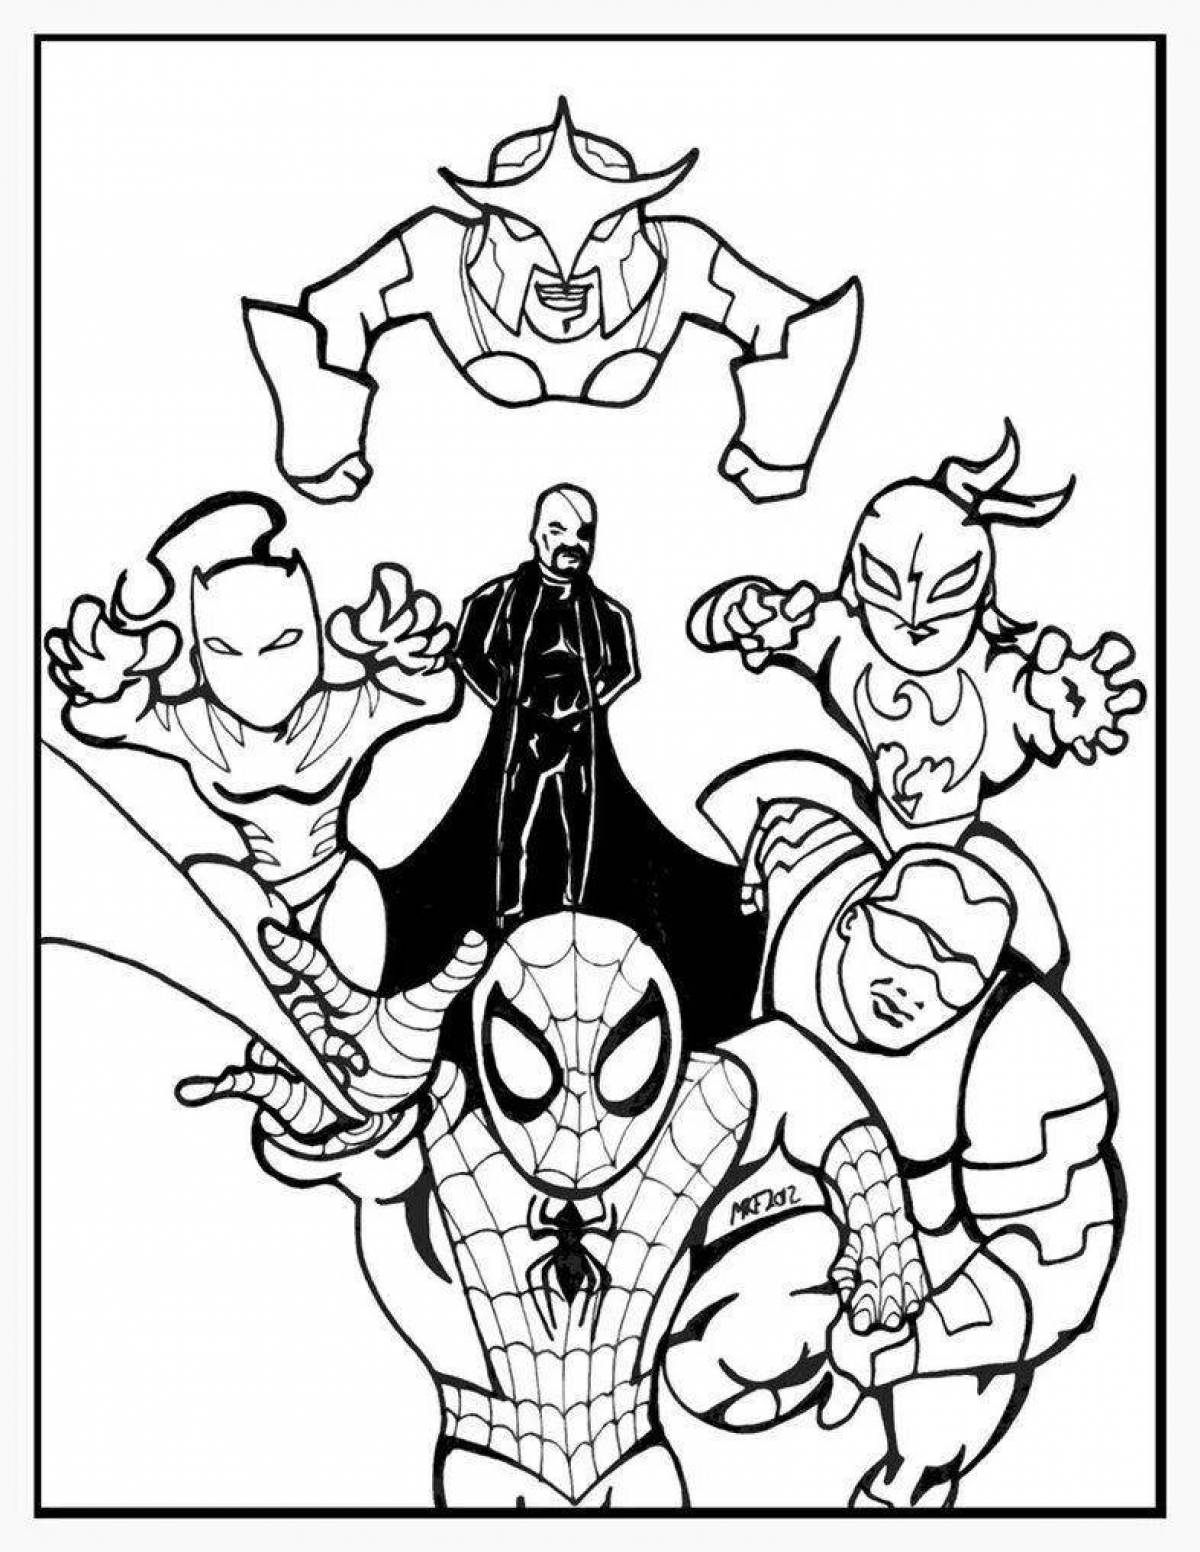 Marvelous spider-man coloring book